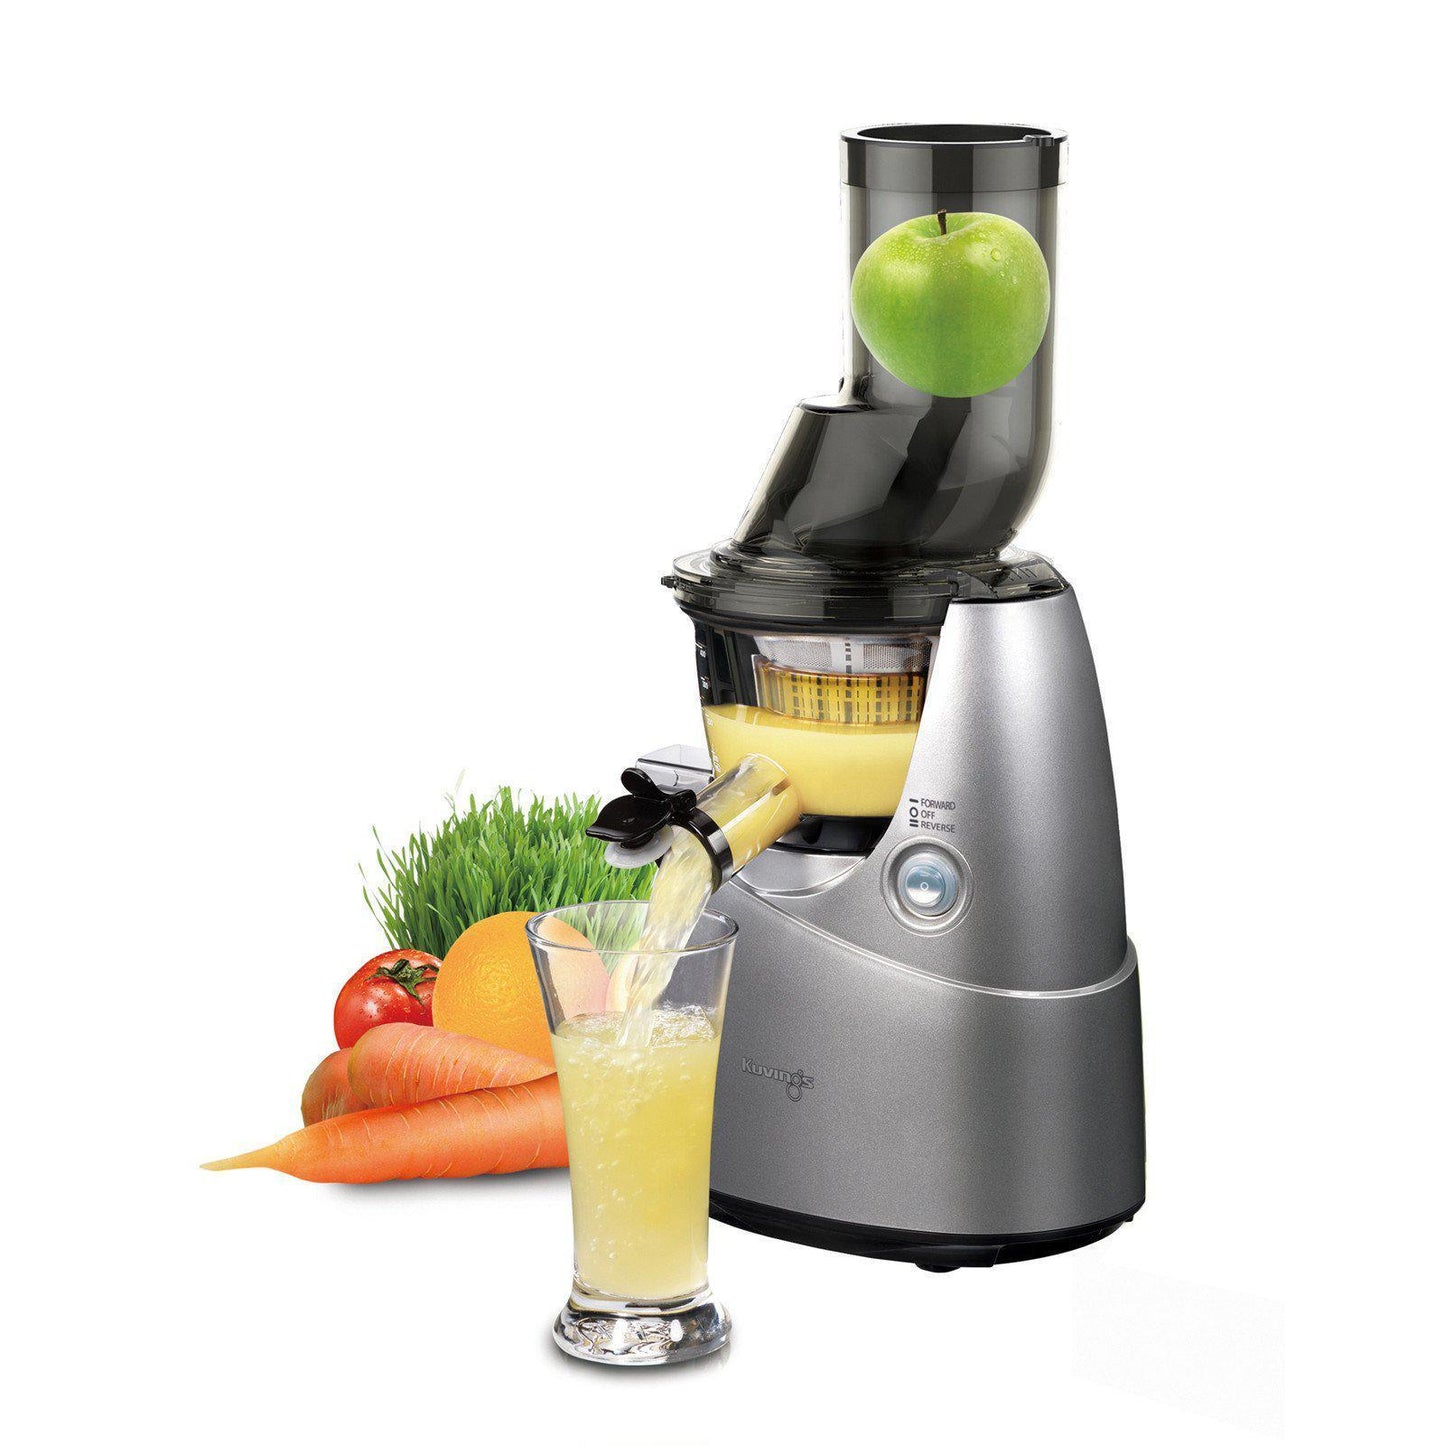 Kuvings Whole Slow Juicer - B6000 Series